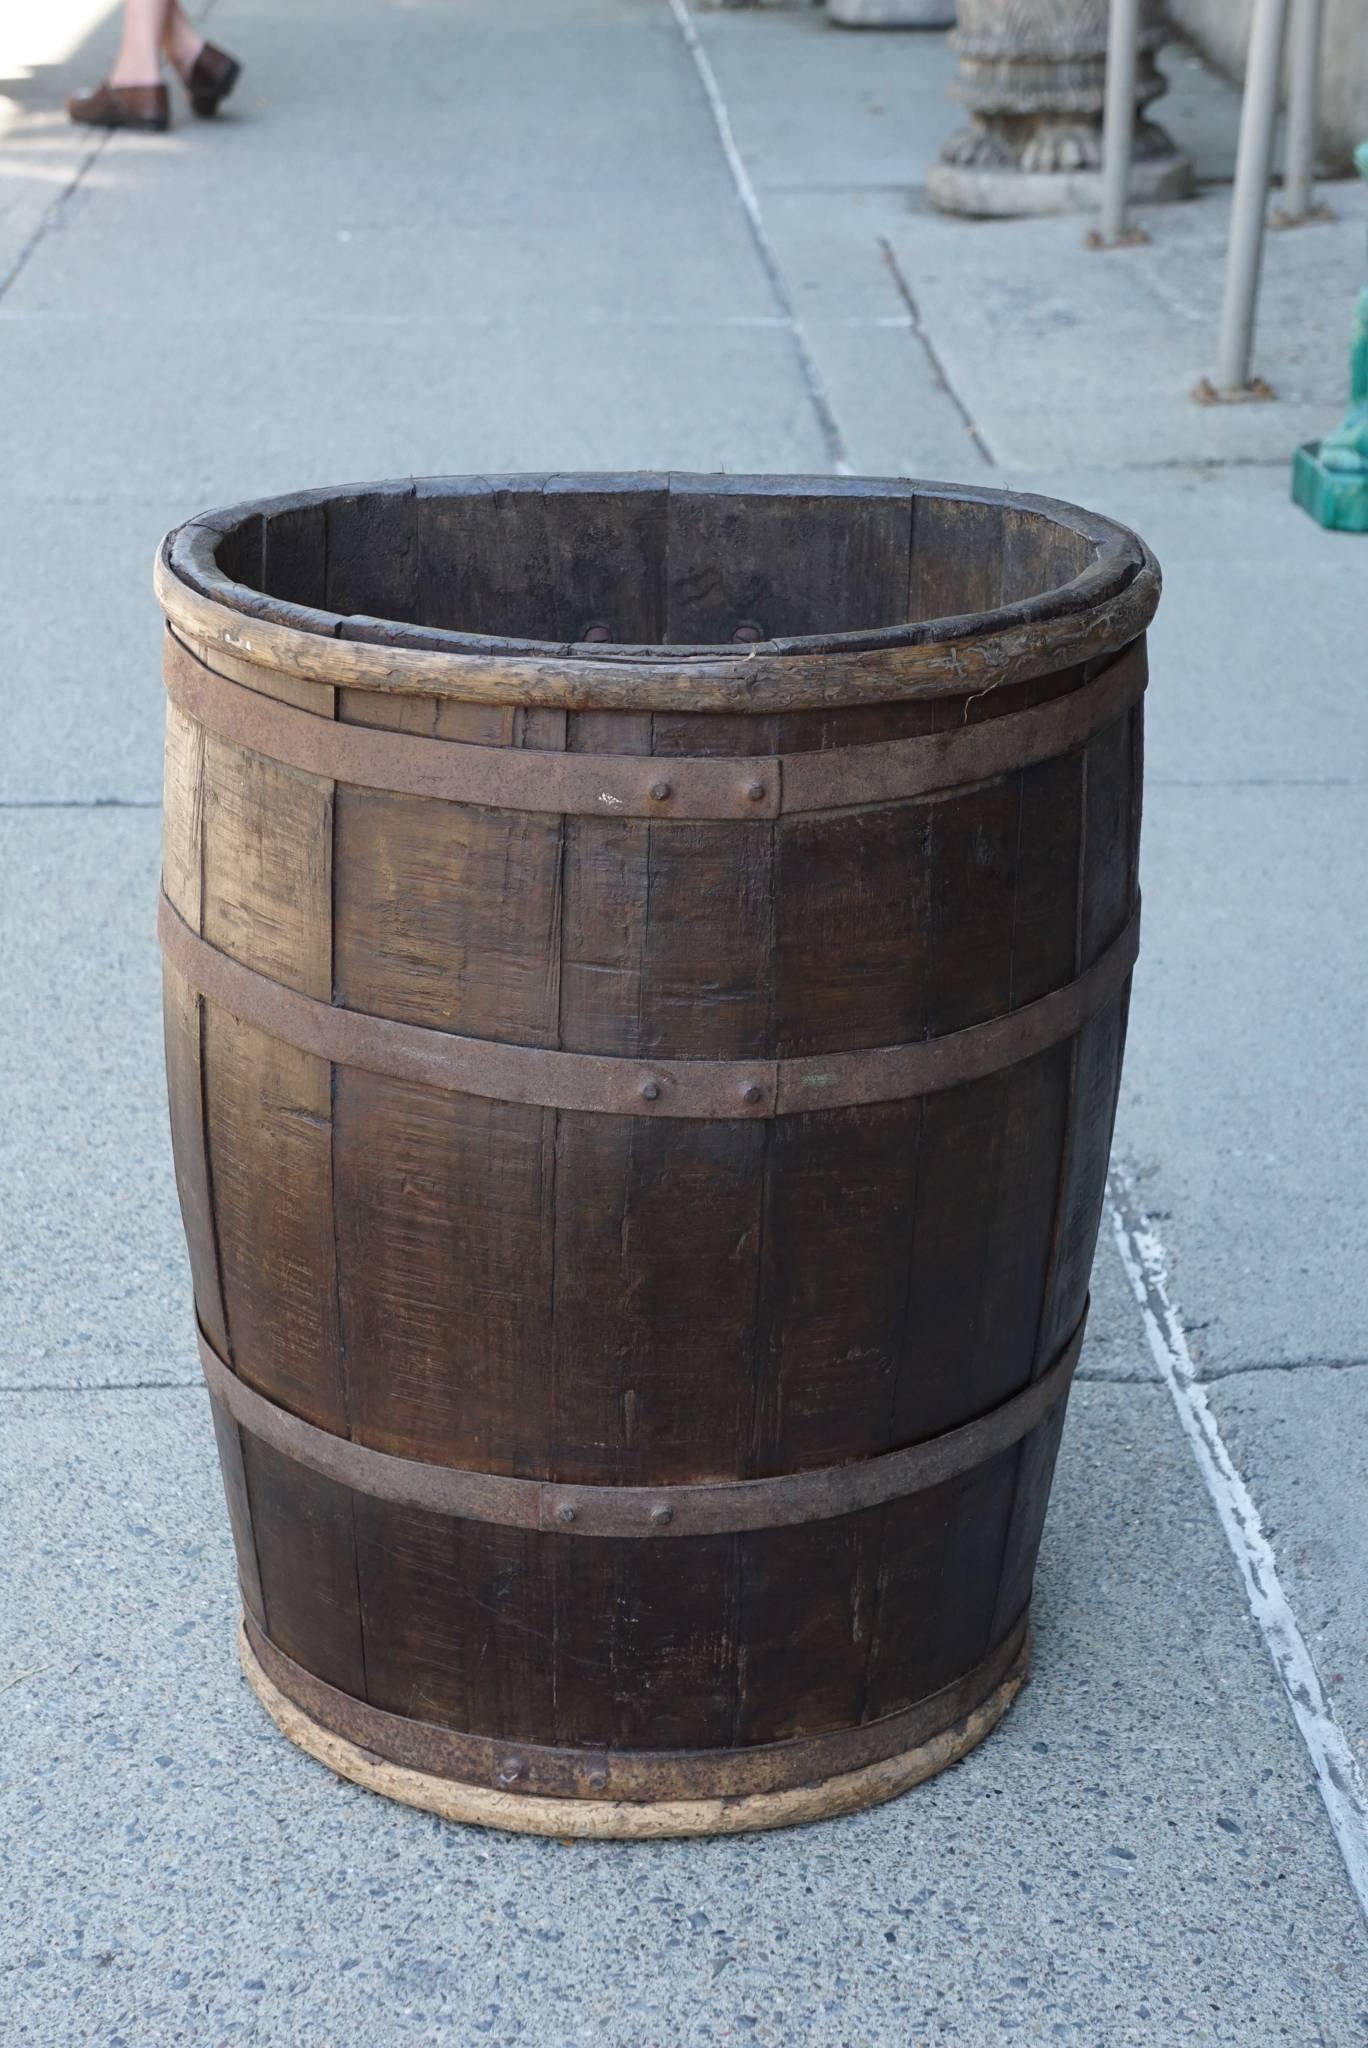 This French work barrel for champagne grapes comes from an old Kinderhook, early 18th century stone house in Upstate New York. Made circa 1860-1870 the oak staves are bound in iron and the barrel has a large iron handle at the back. This form would